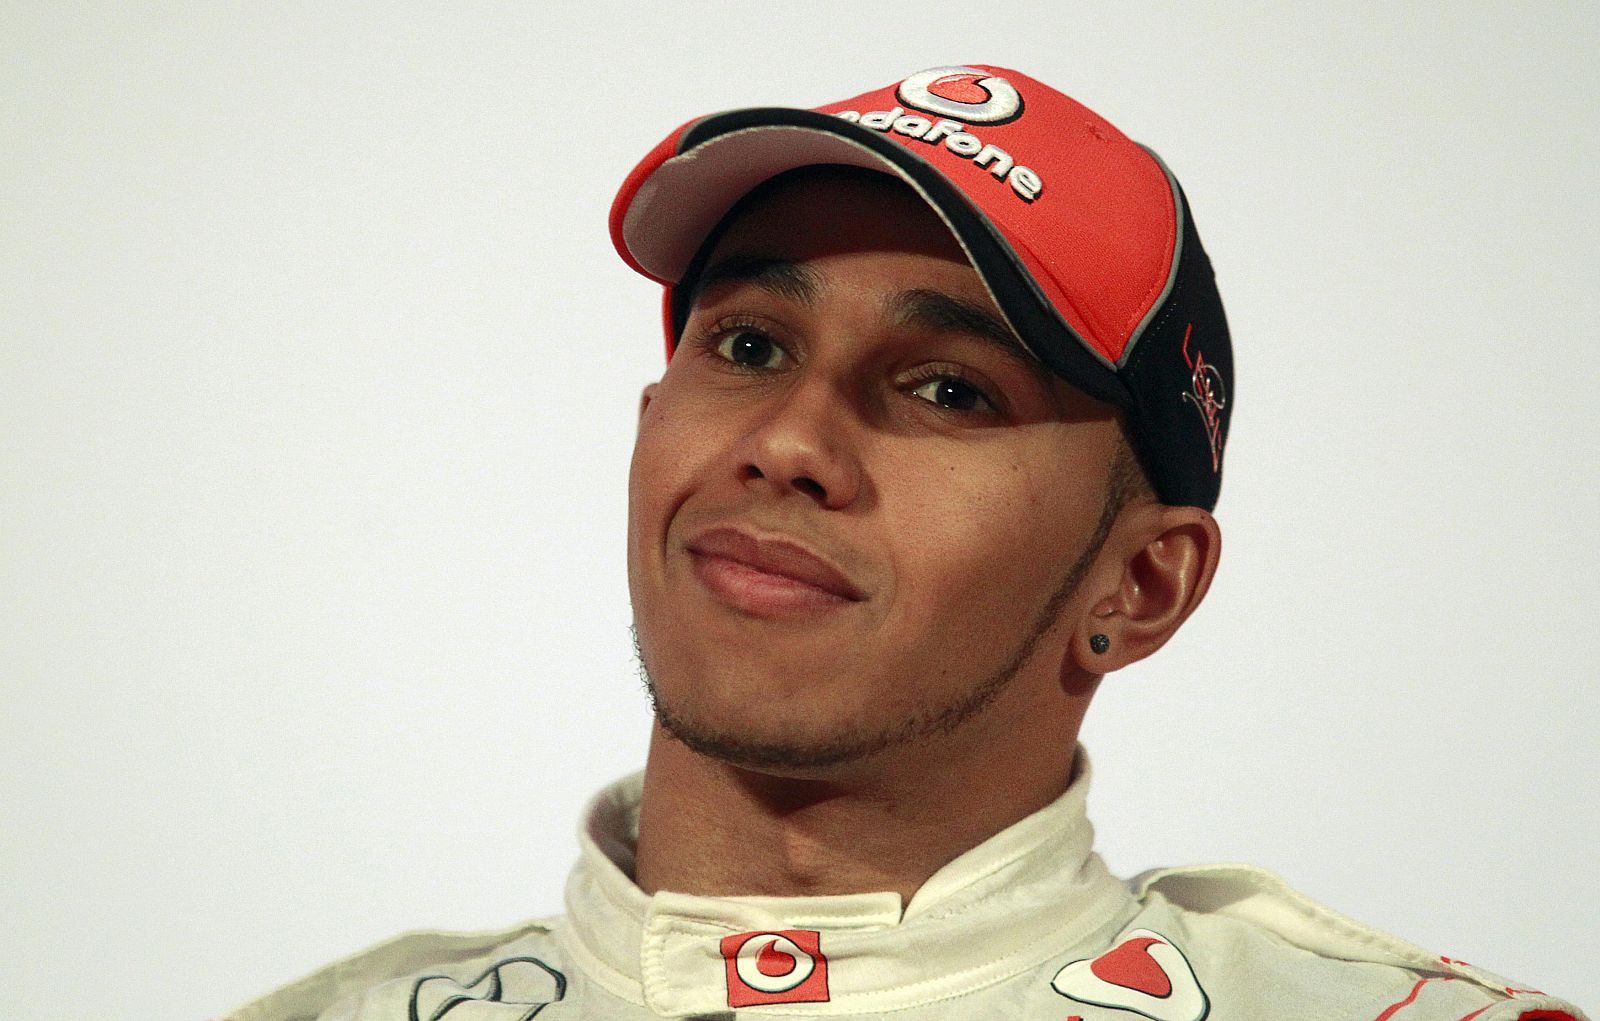 McLaren Formula One racing driver Hamilton attends news conference after unveiling of new McLaren Mercedes MP4-26 racing car in Berlin